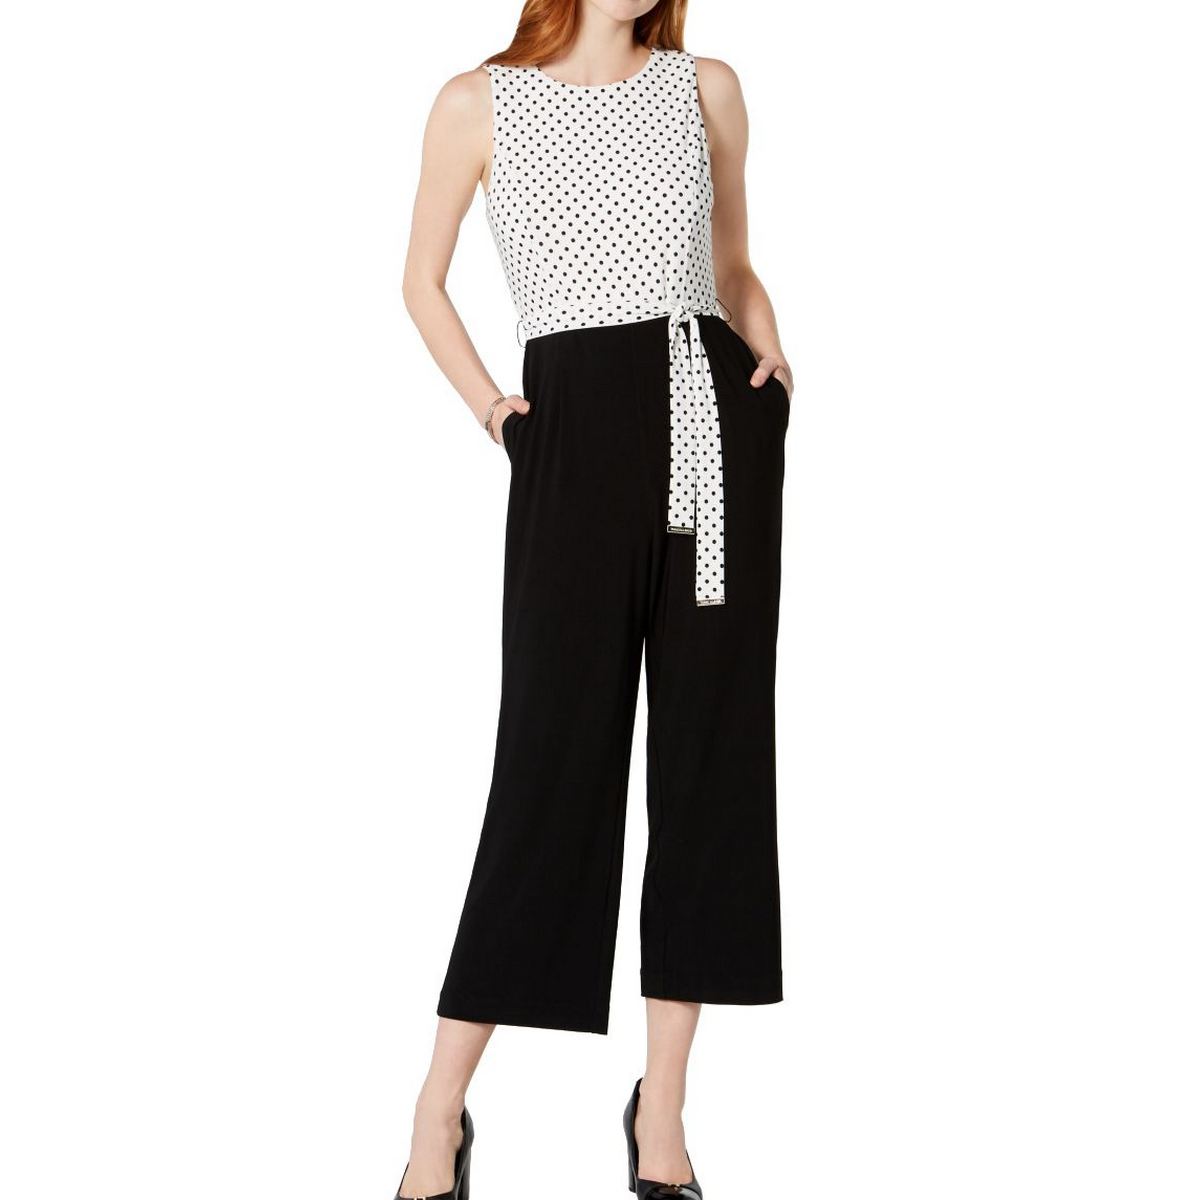 TOMMY HILFIGER NEW Women's Ivory/black Dotted Tie Waist Cropped ...